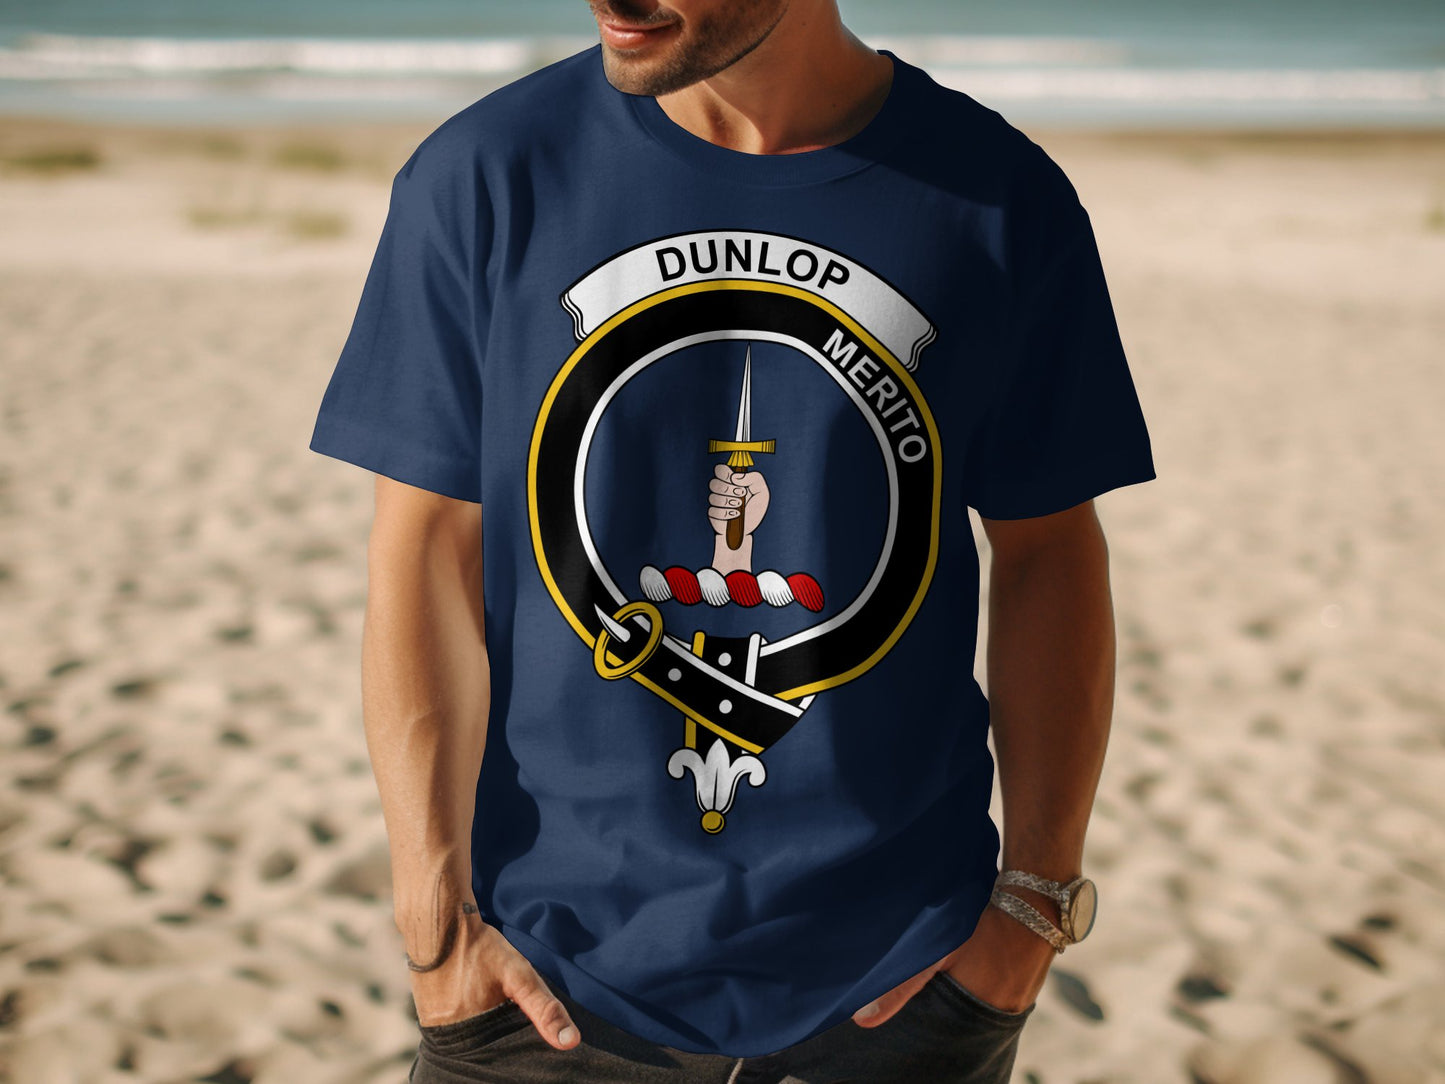 Dunlop Scottish Clan Crest T-Shirt for Highland Games - Living Stone Gifts